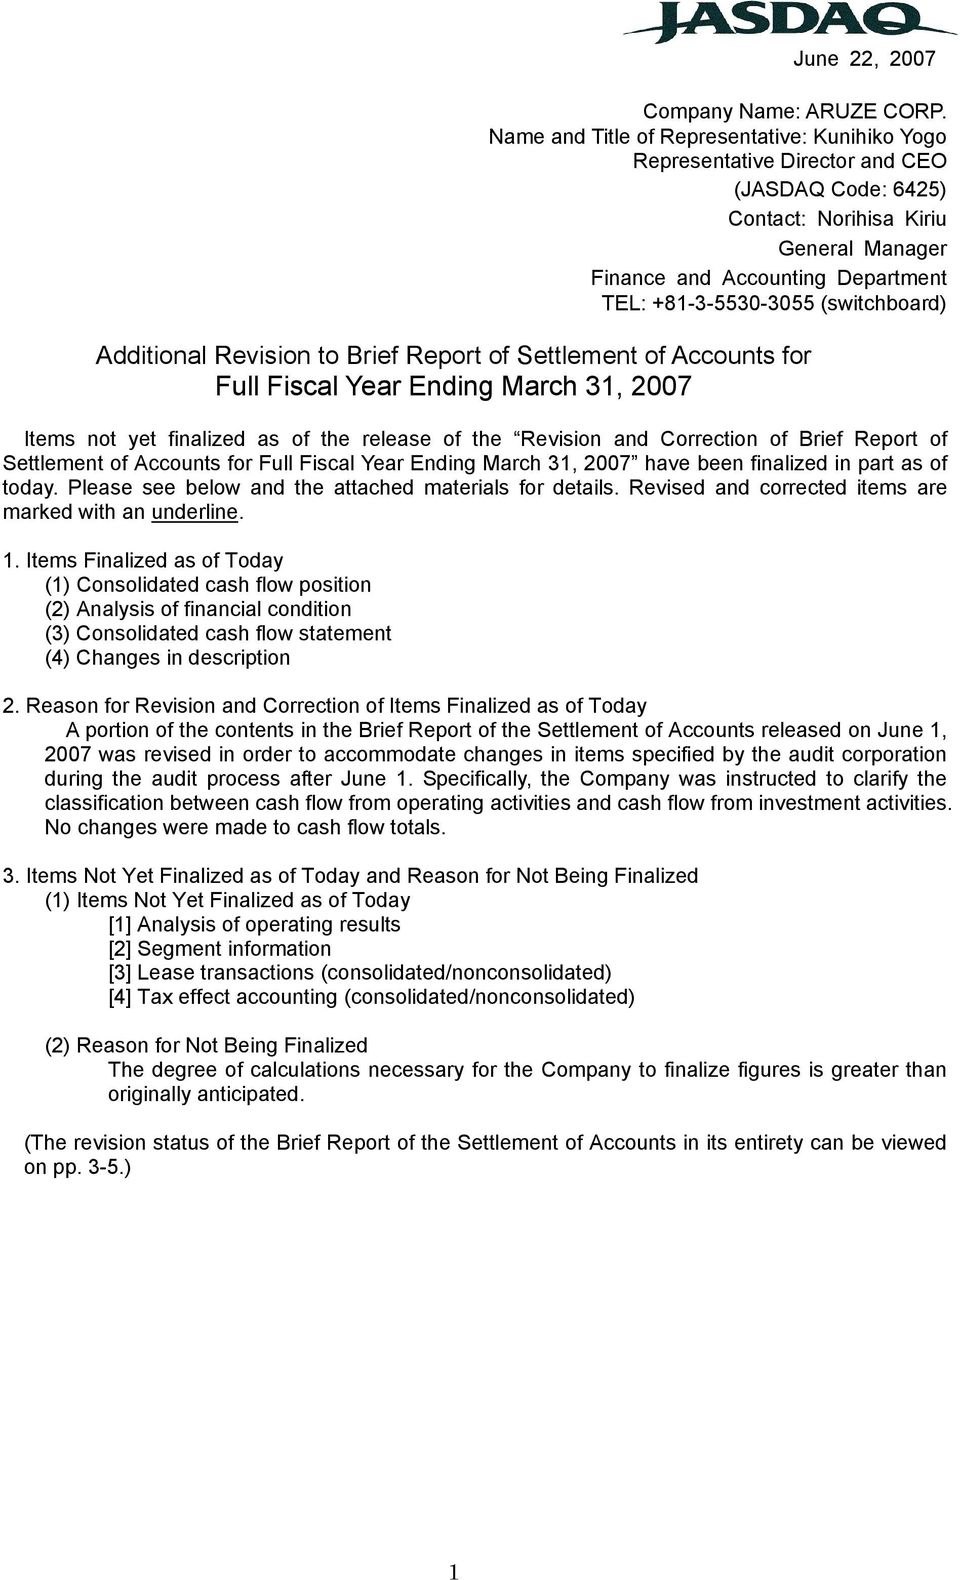 (switchboard) Additional Revision to Brief Report of Settlement of Accounts for Full Fiscal Year Ending March 31, 2007 Items not yet finalized as of the release of the Revision and Correction of